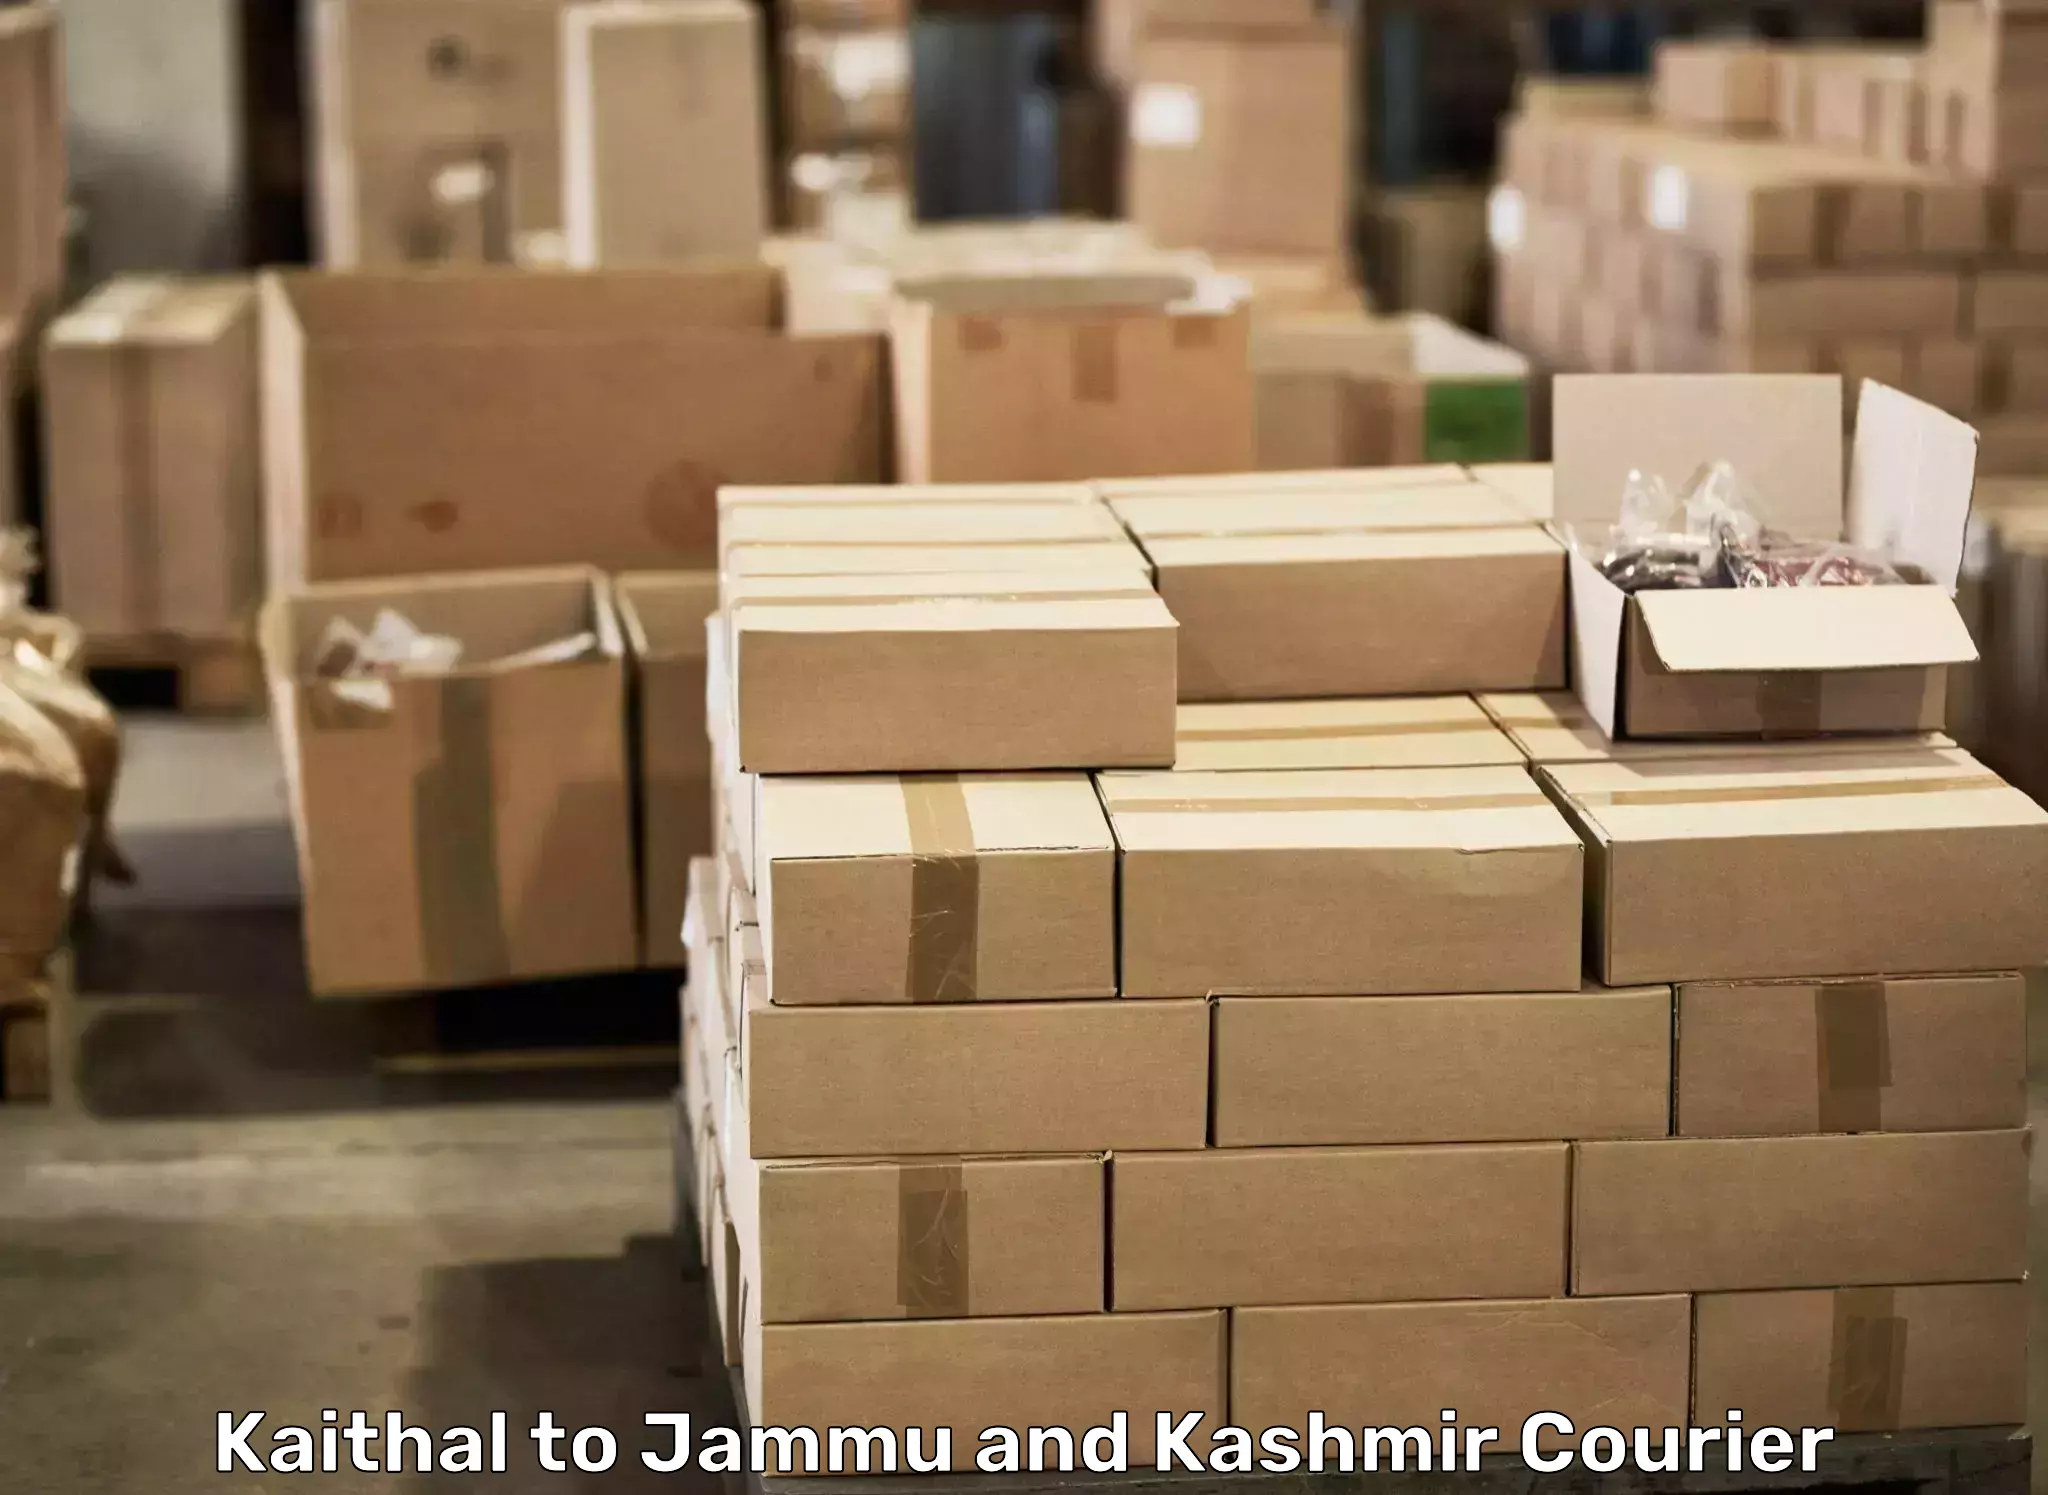 Trusted relocation experts Kaithal to Pulwama